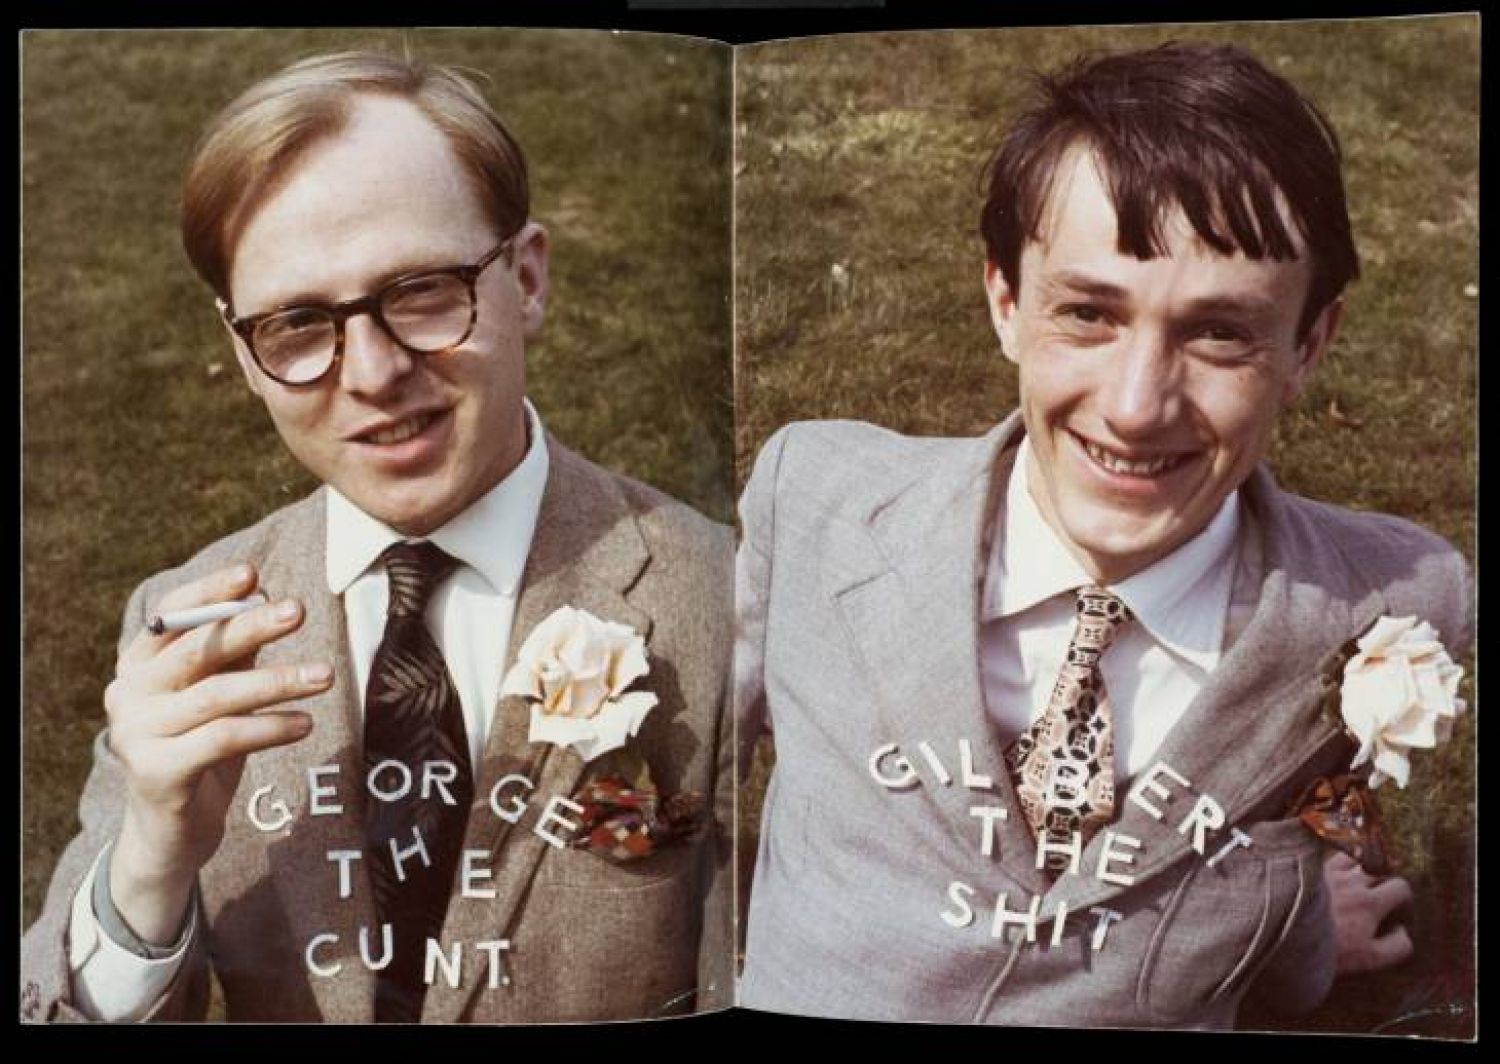 Gilbert the Cunt and Gilbert the Shit, 1969